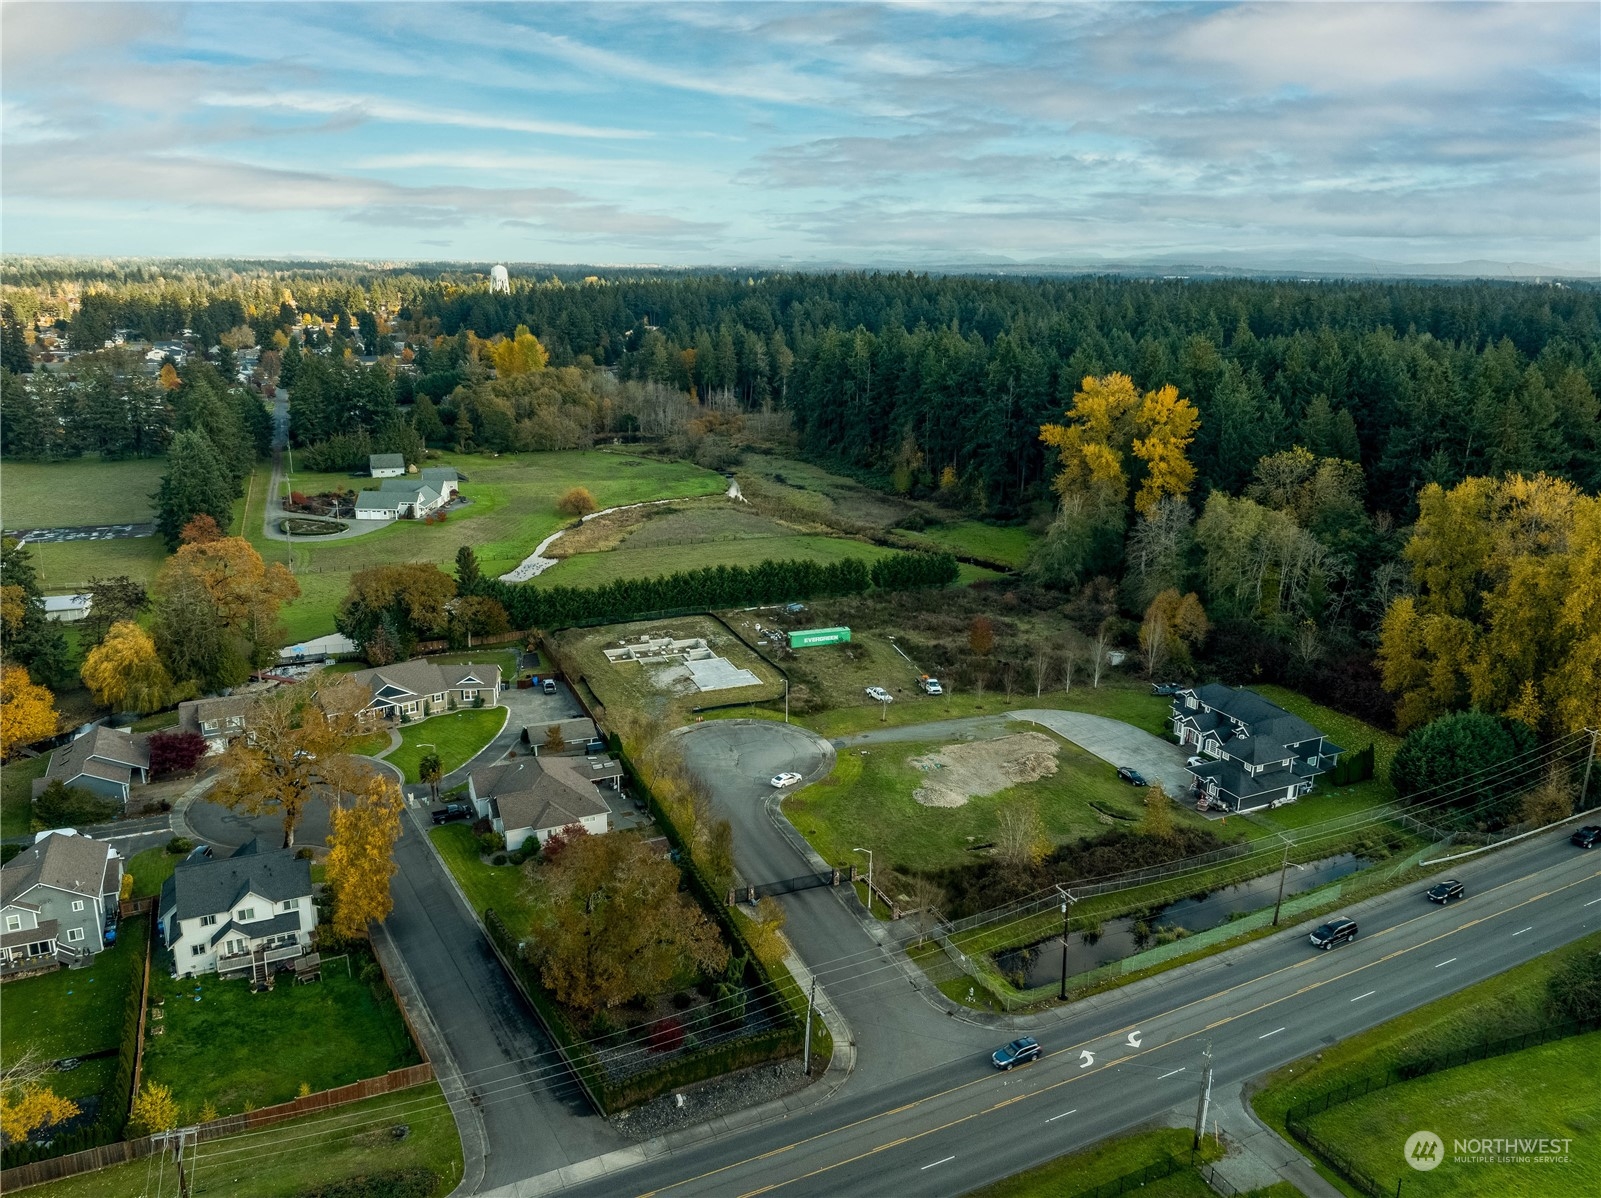 an aerial view of a golf course with parking space